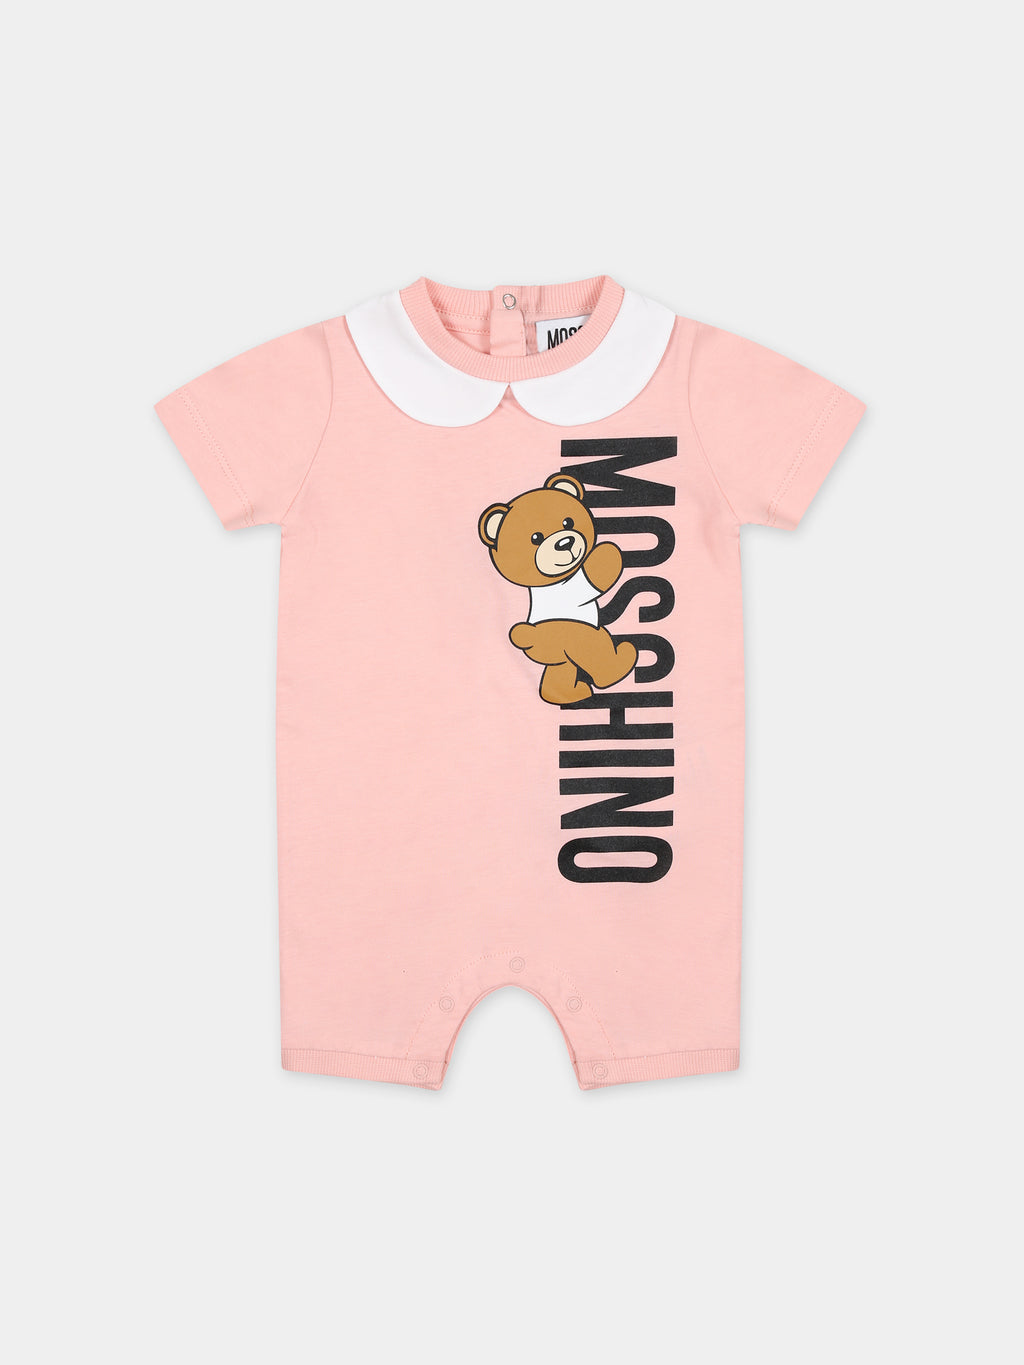 Pink romper for baby girl with Teddy Bear